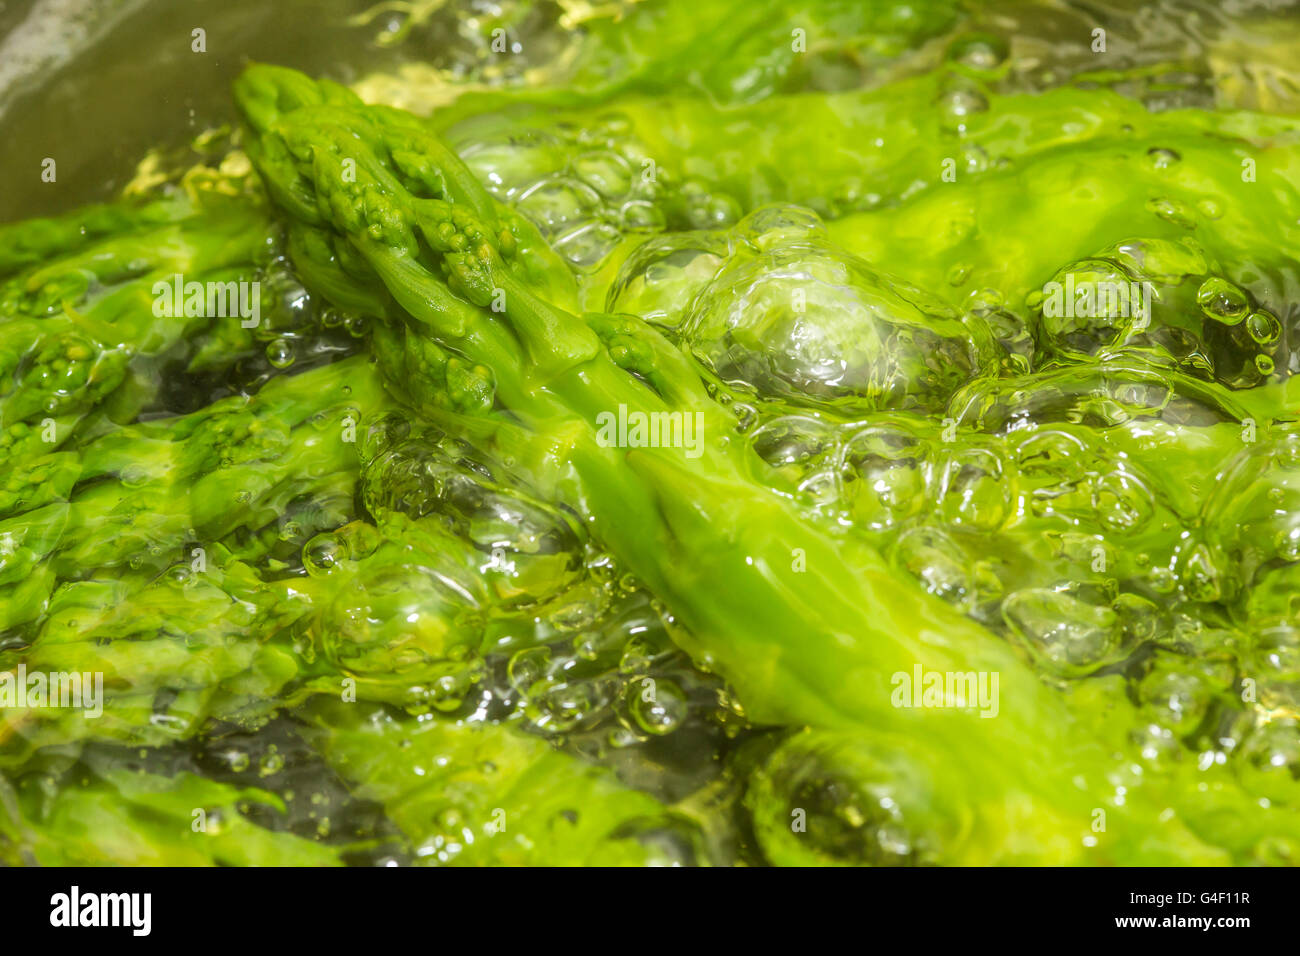 Green asparagus is cooking, boiling, simmering, in a cooking pot, Stock Photo